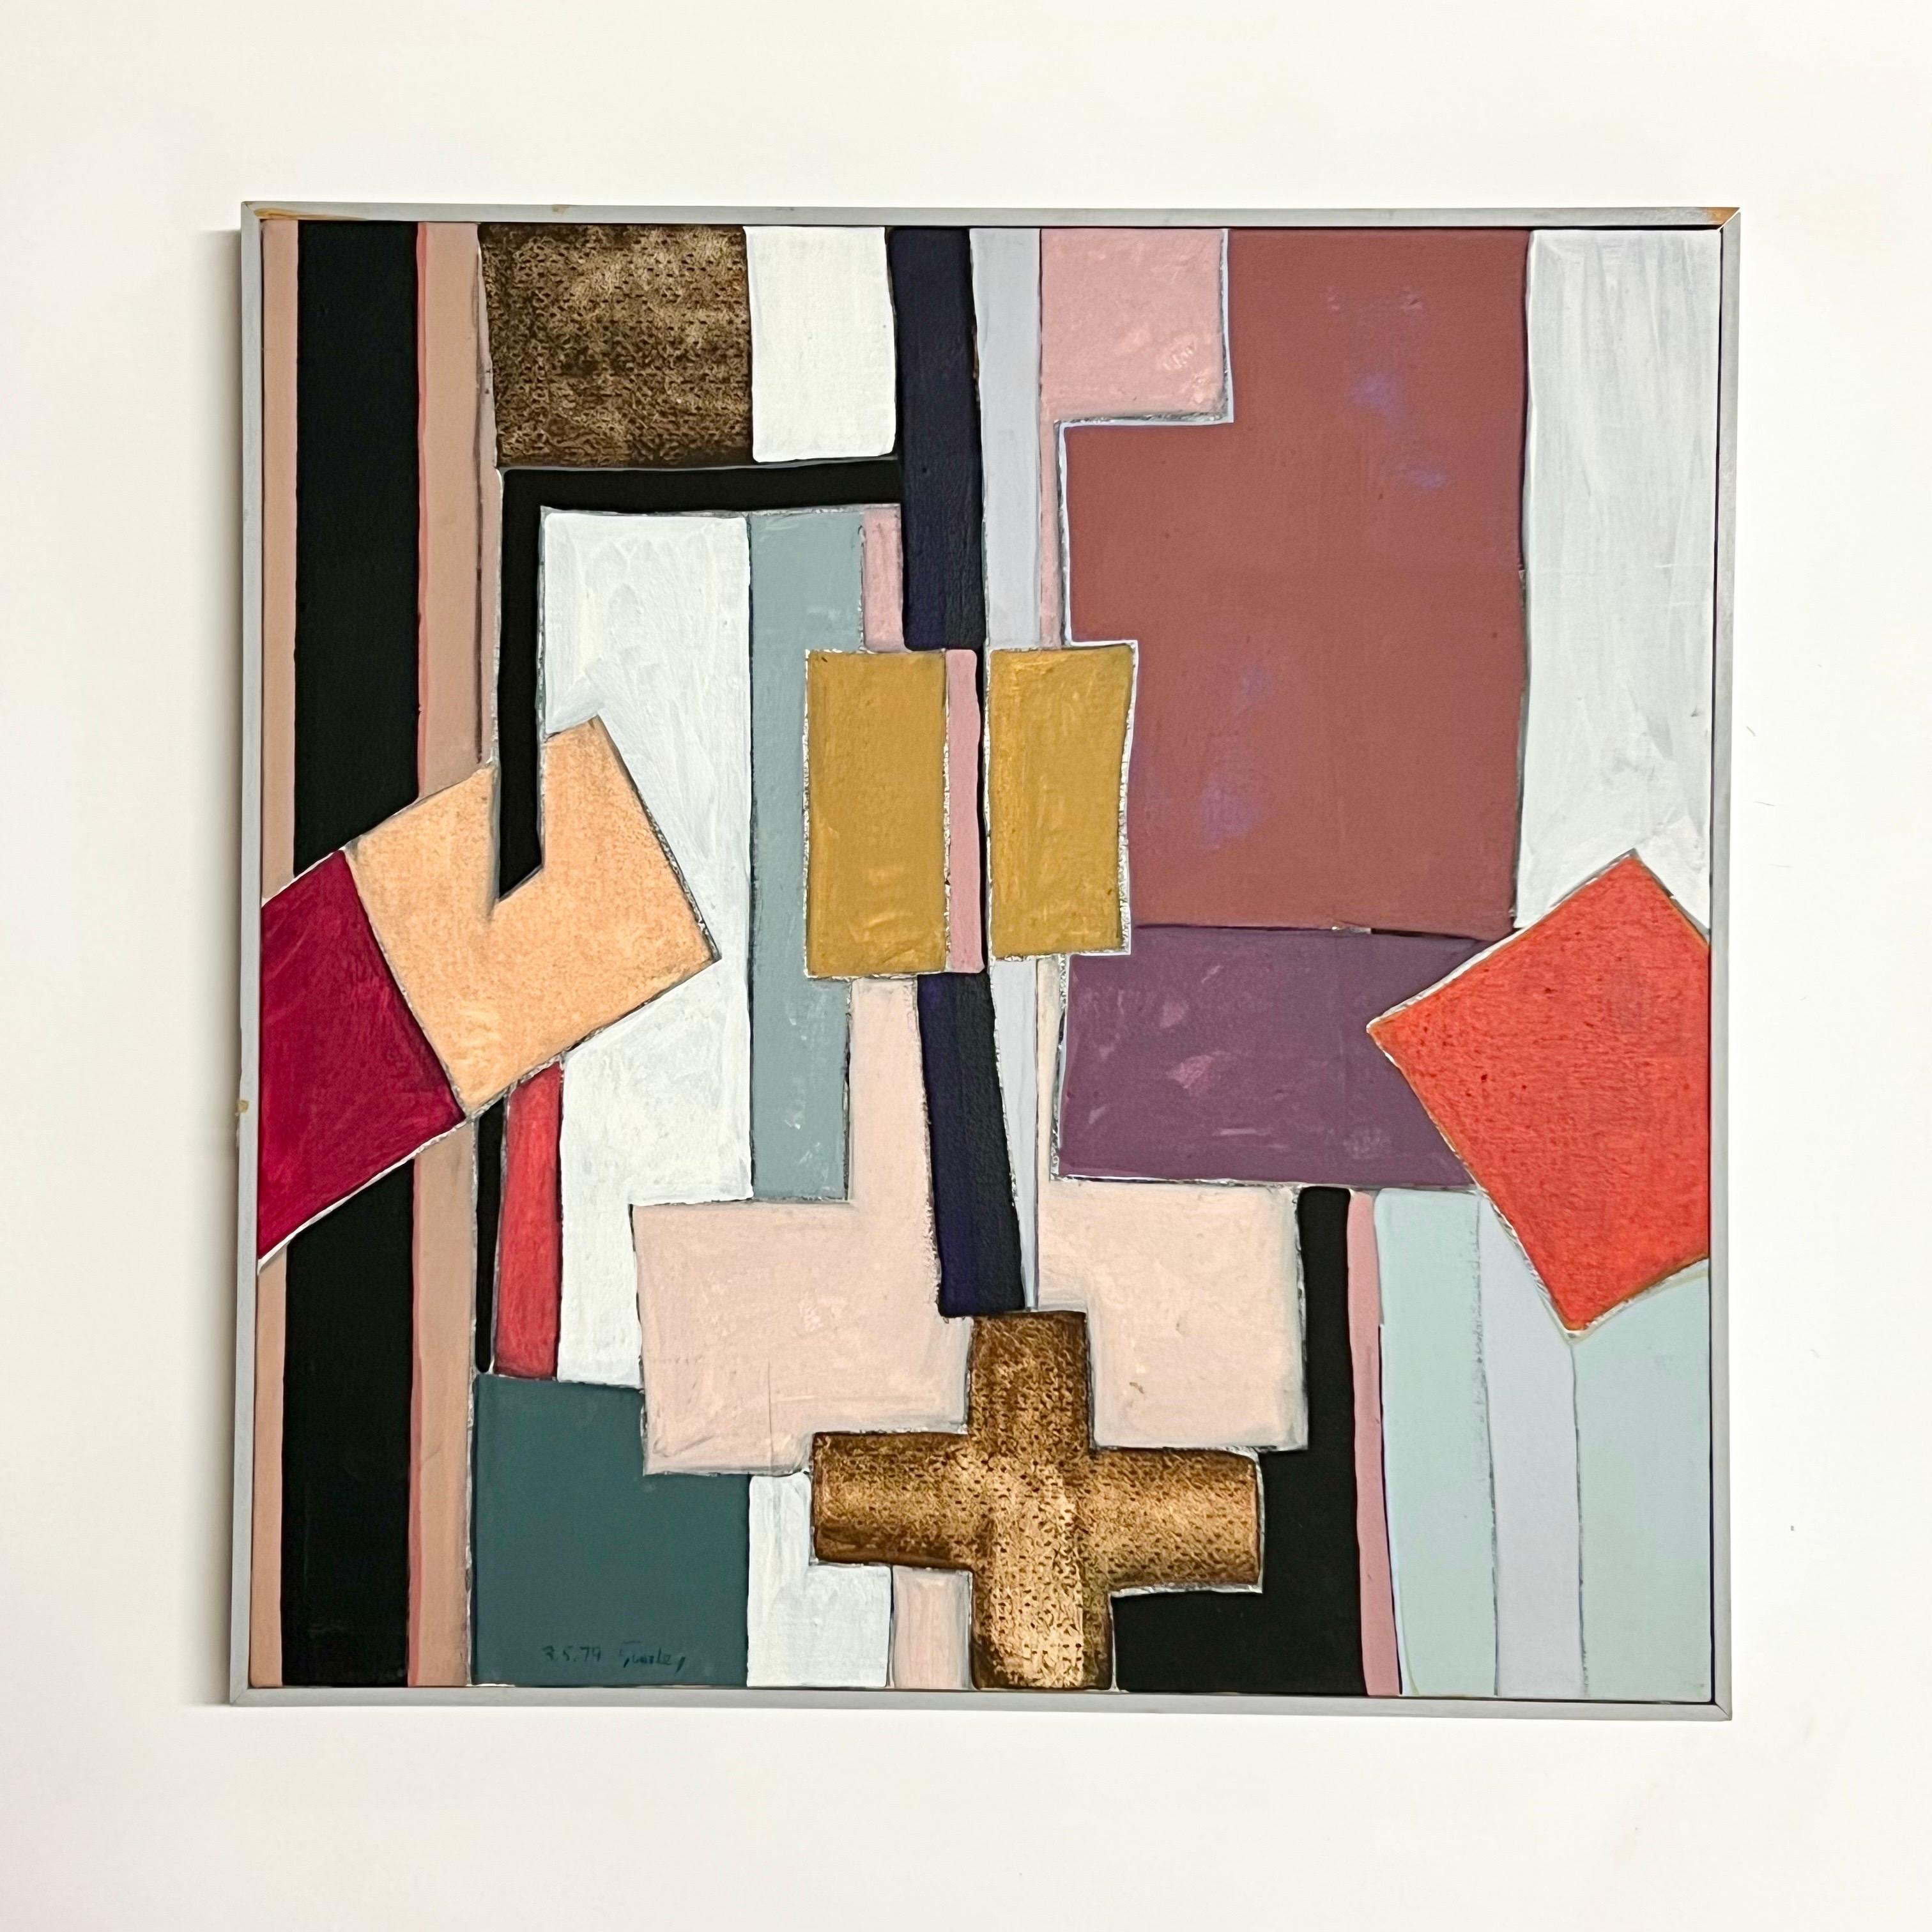 Beautiful geometric abstract oil on canvas by American artist, Harley Francis (1940-2017). Francis was an incredibly prolific artist, painter, set designer, and ceramicist. Francis was based in Northern California in his later years and was heavily